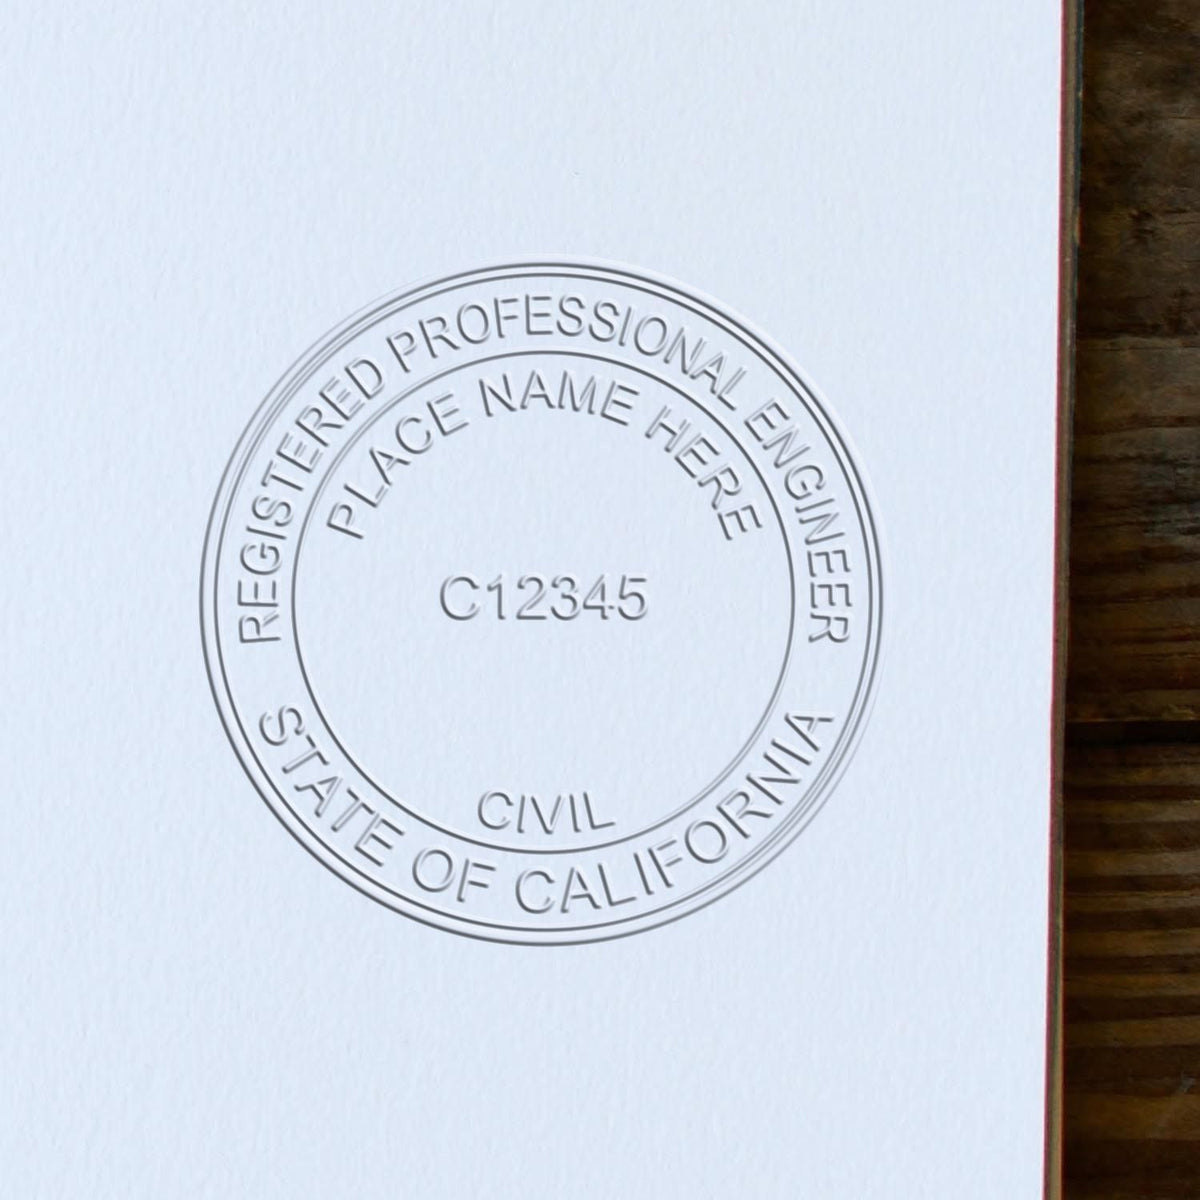 An in use photo of the Hybrid California Engineer Seal showing a sample imprint on a cardstock